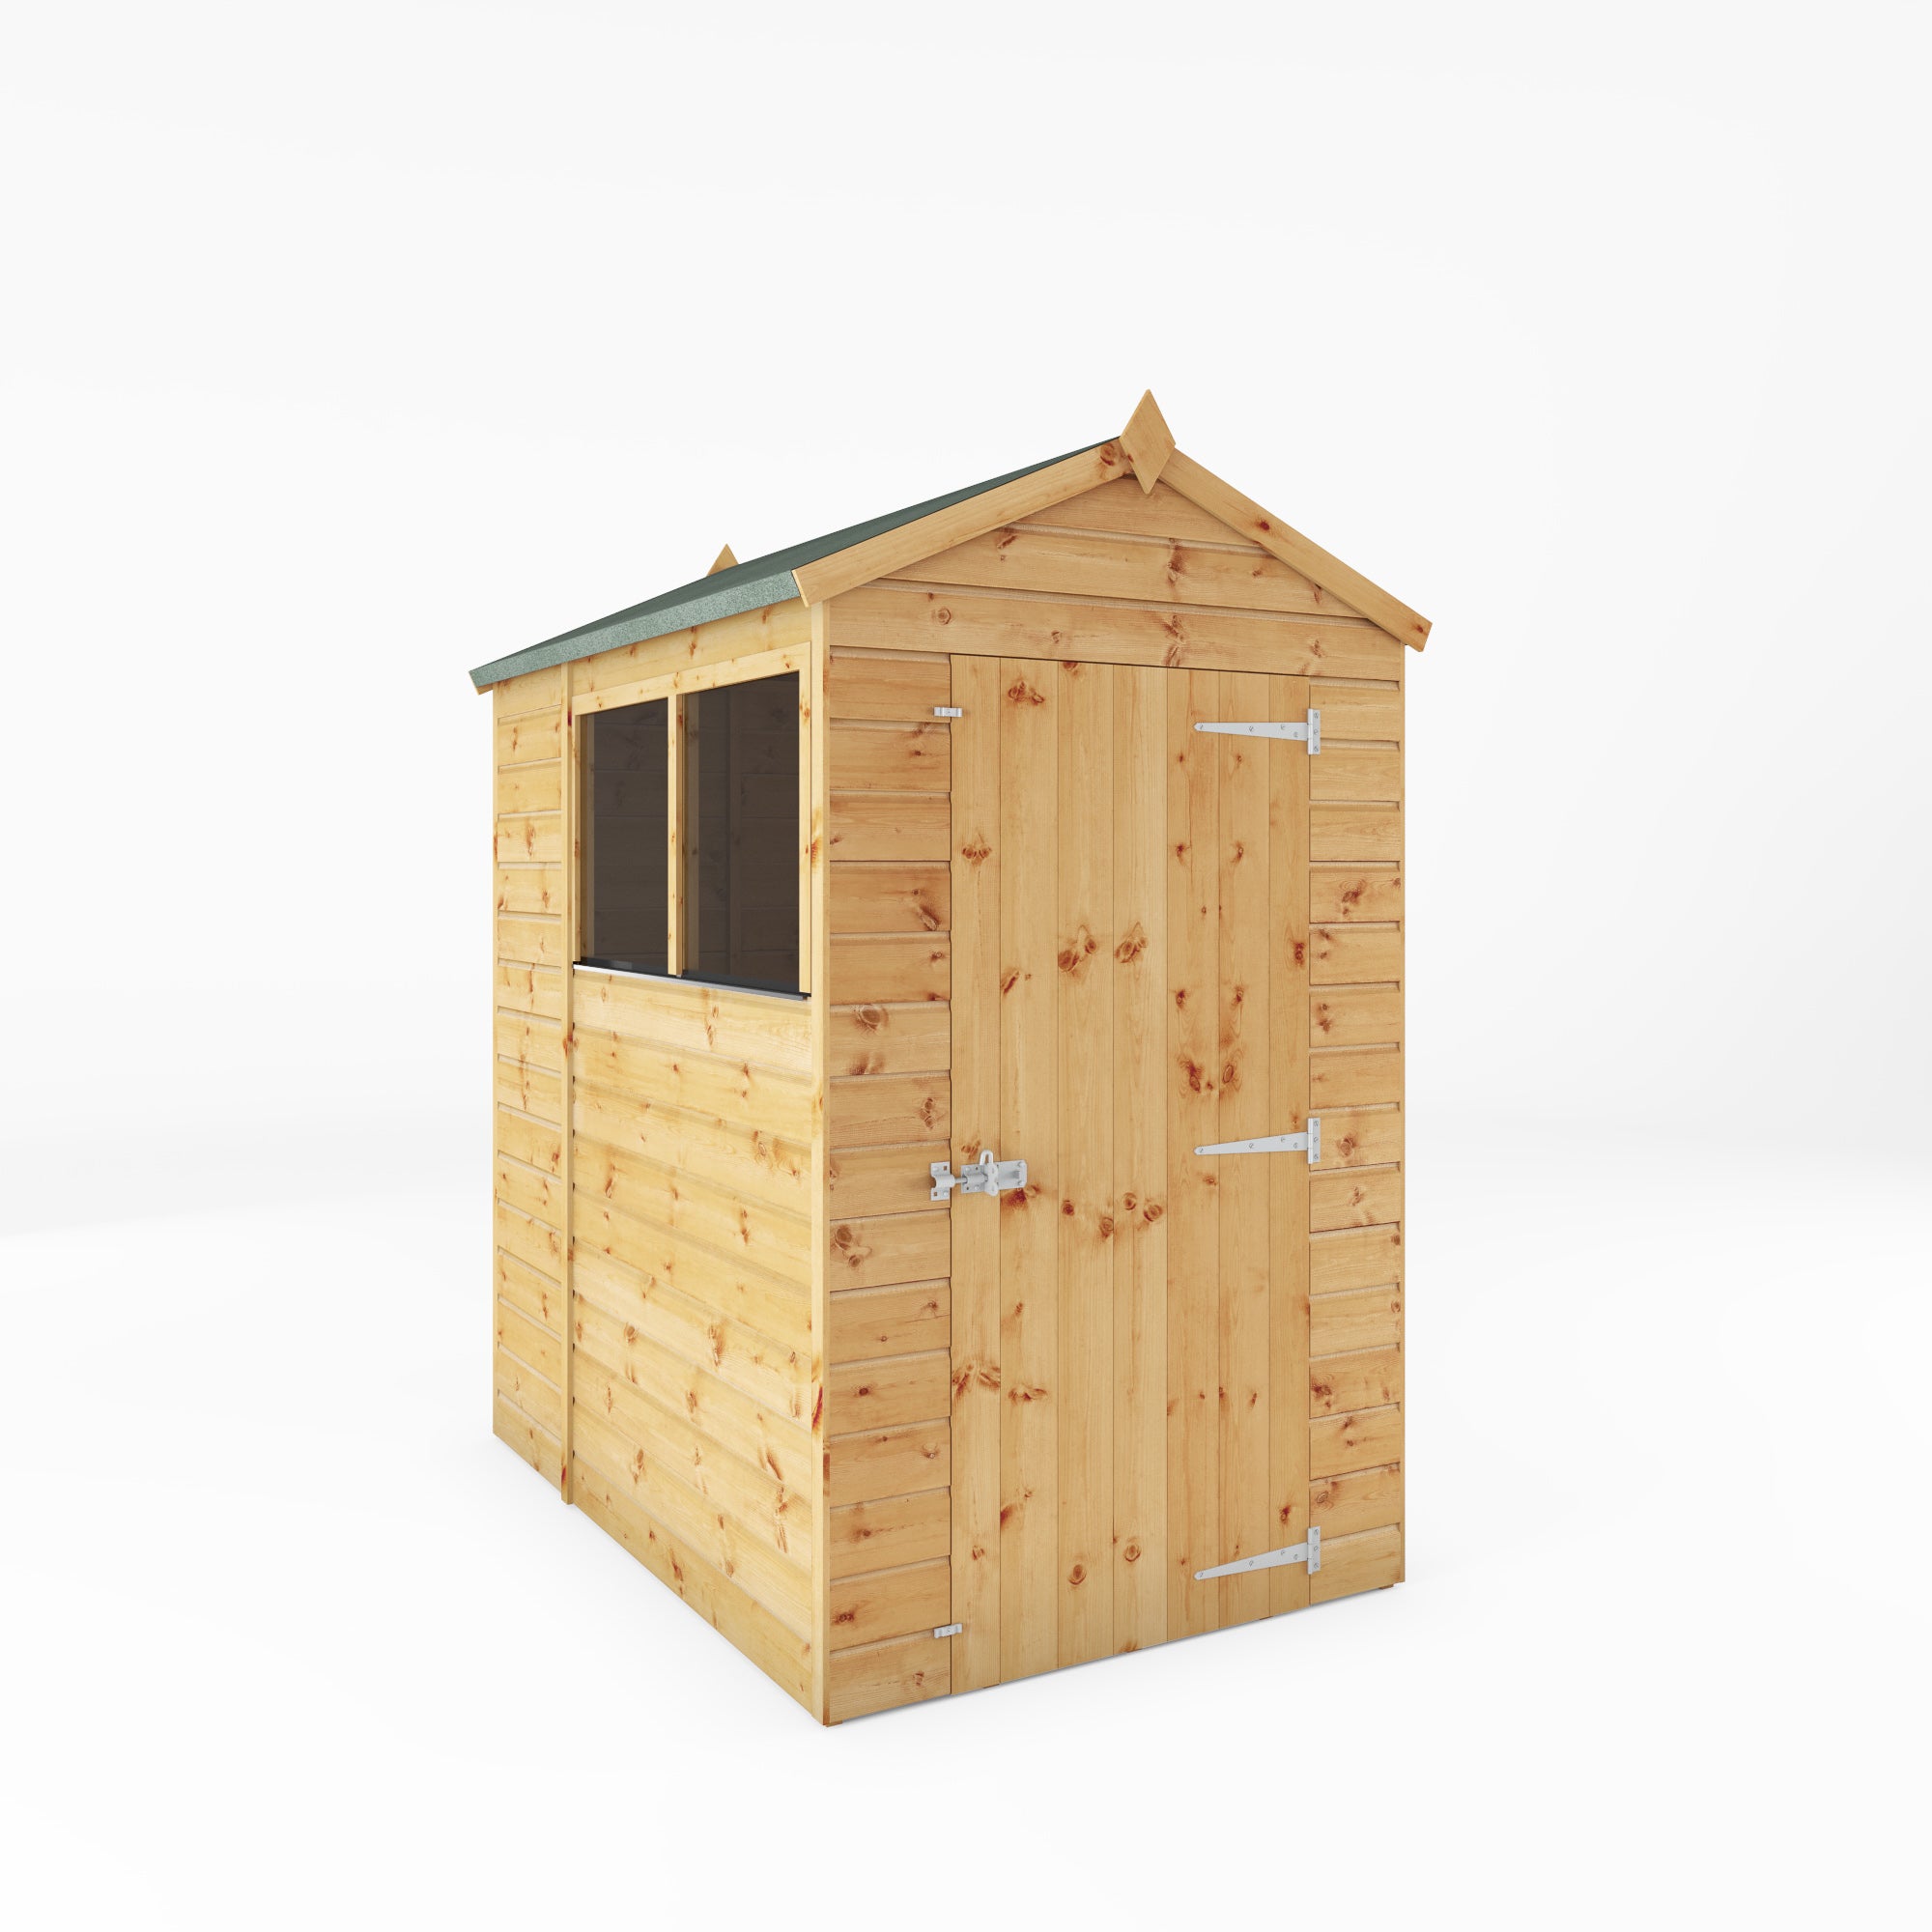 6 x 4 Shiplap Apex Wooden Shed